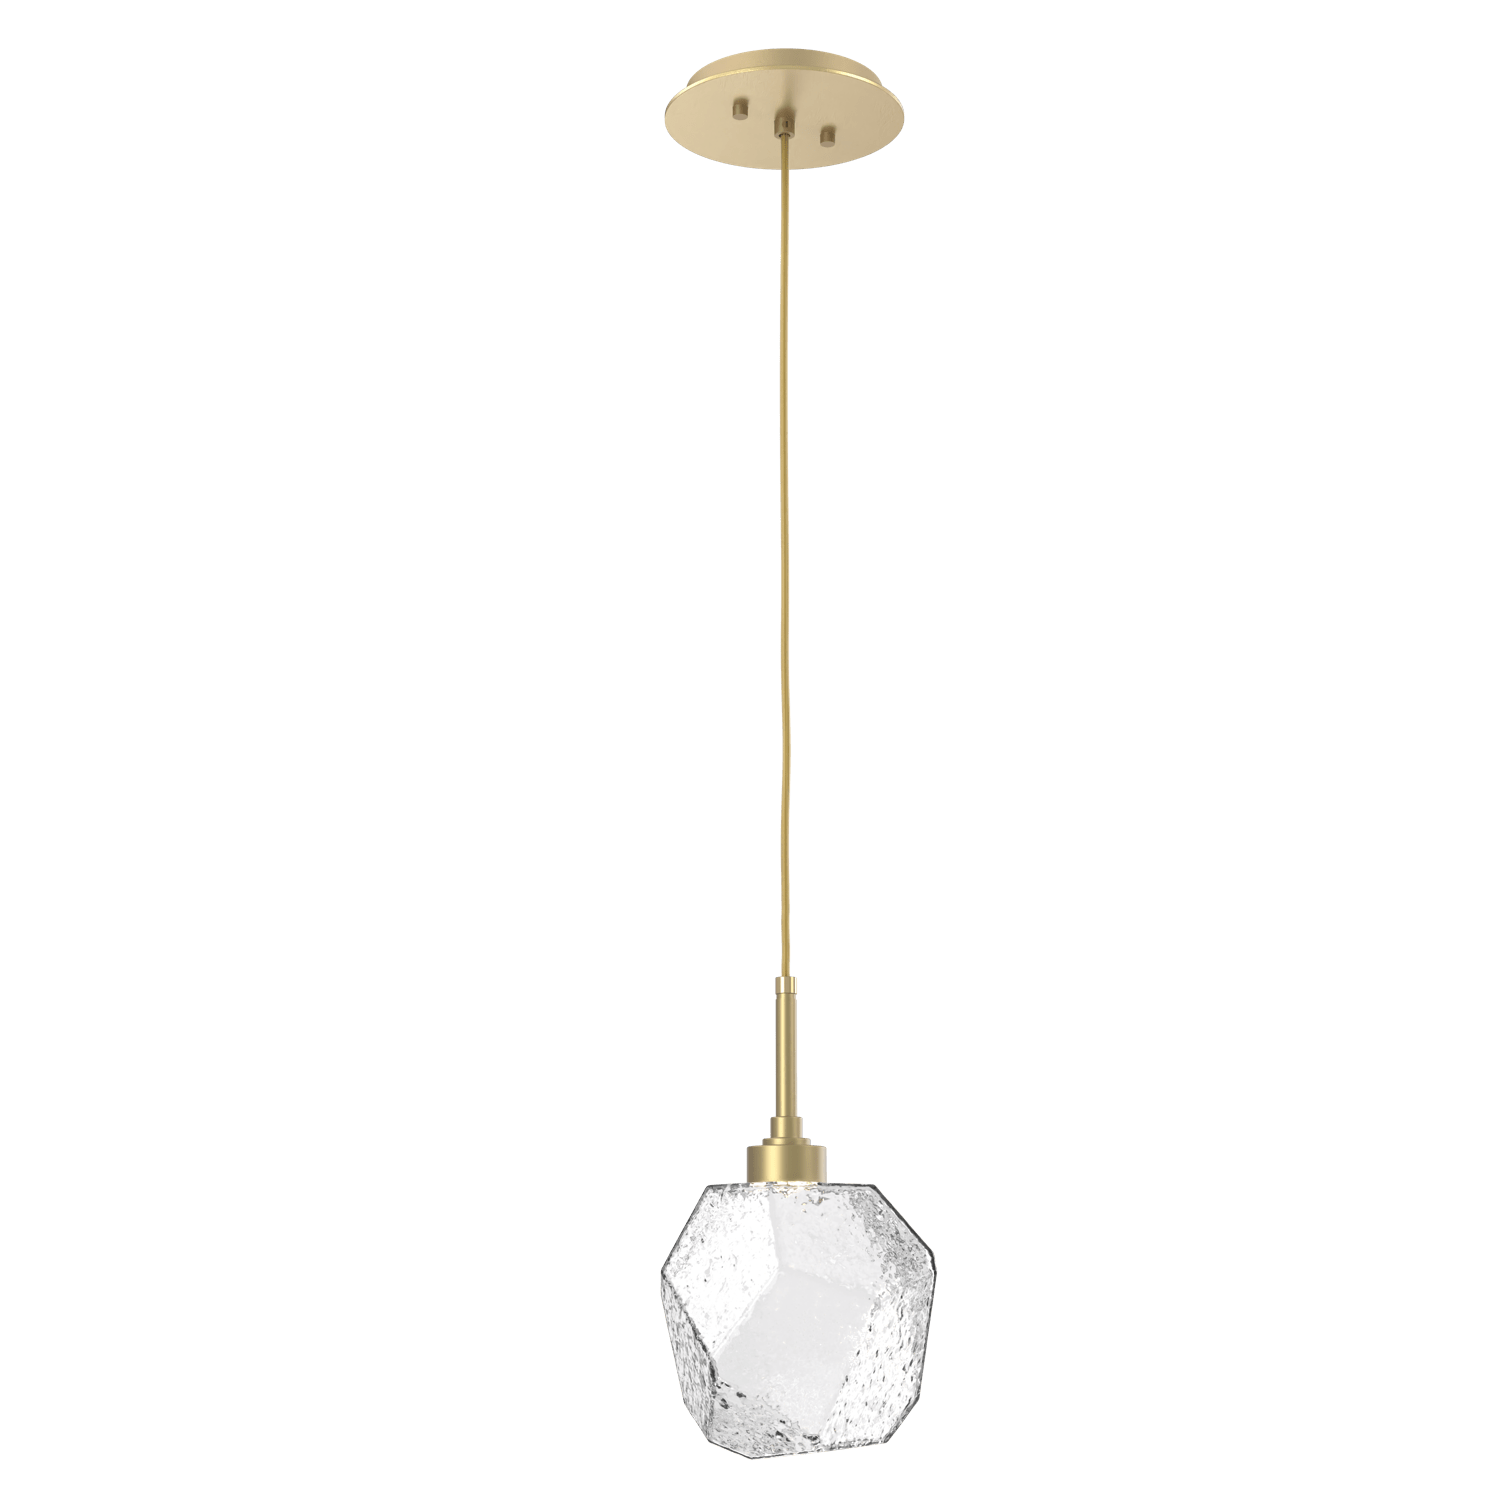 LAB0039-01-GB-C-Hammerton-Studio-Gem-pendant-light-with-gilded-brass-finish-and-clear-blown-glass-shades-and-LED-lamping